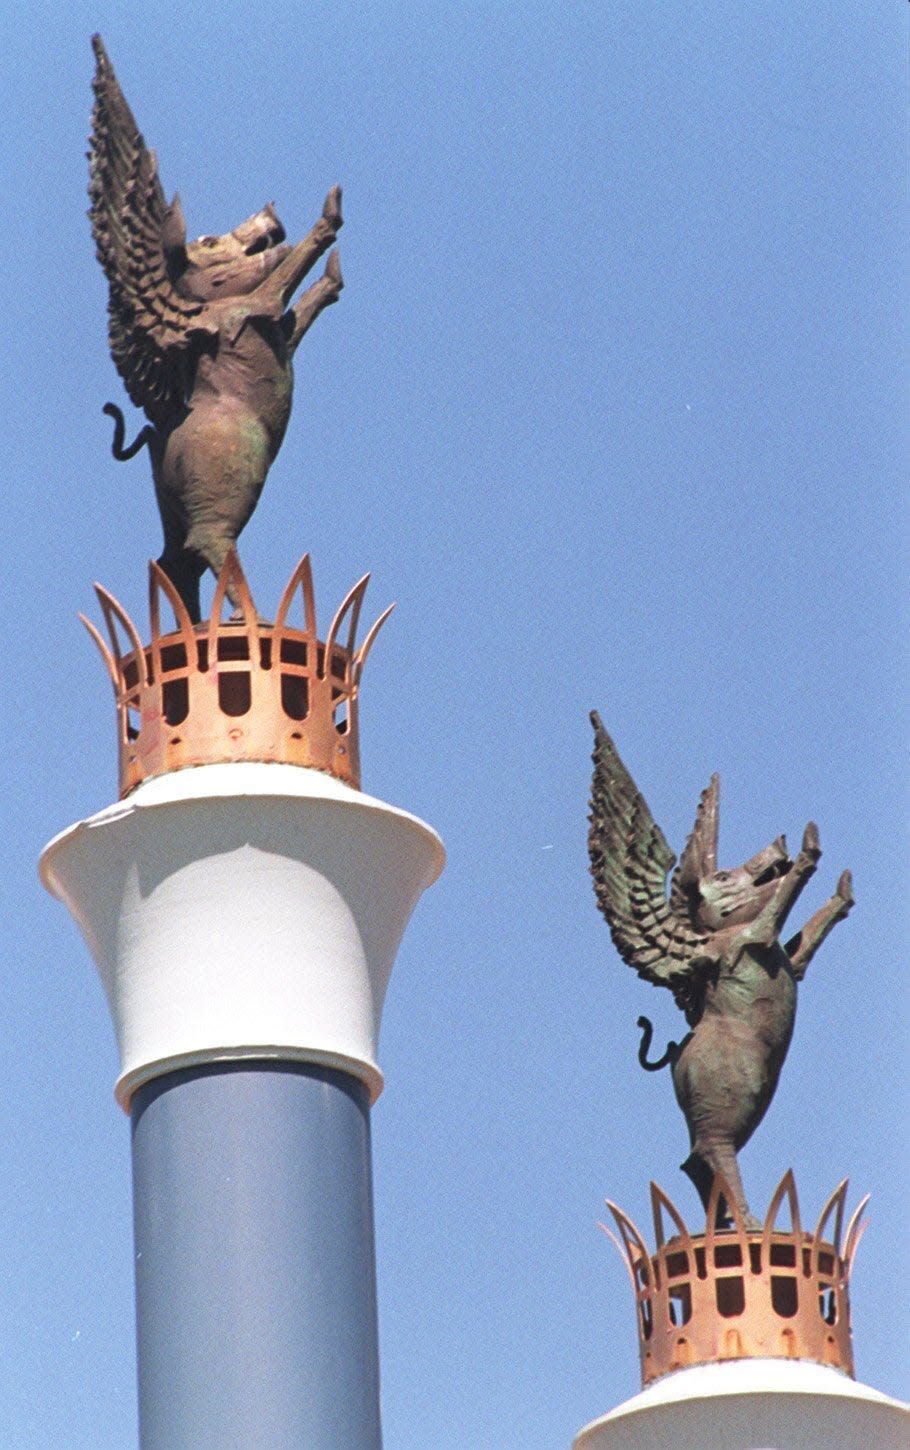 The flying pigs at the entrance of Bicentennial Park at Sawyer Point honor Cincinnati’s past as Porkopolis.